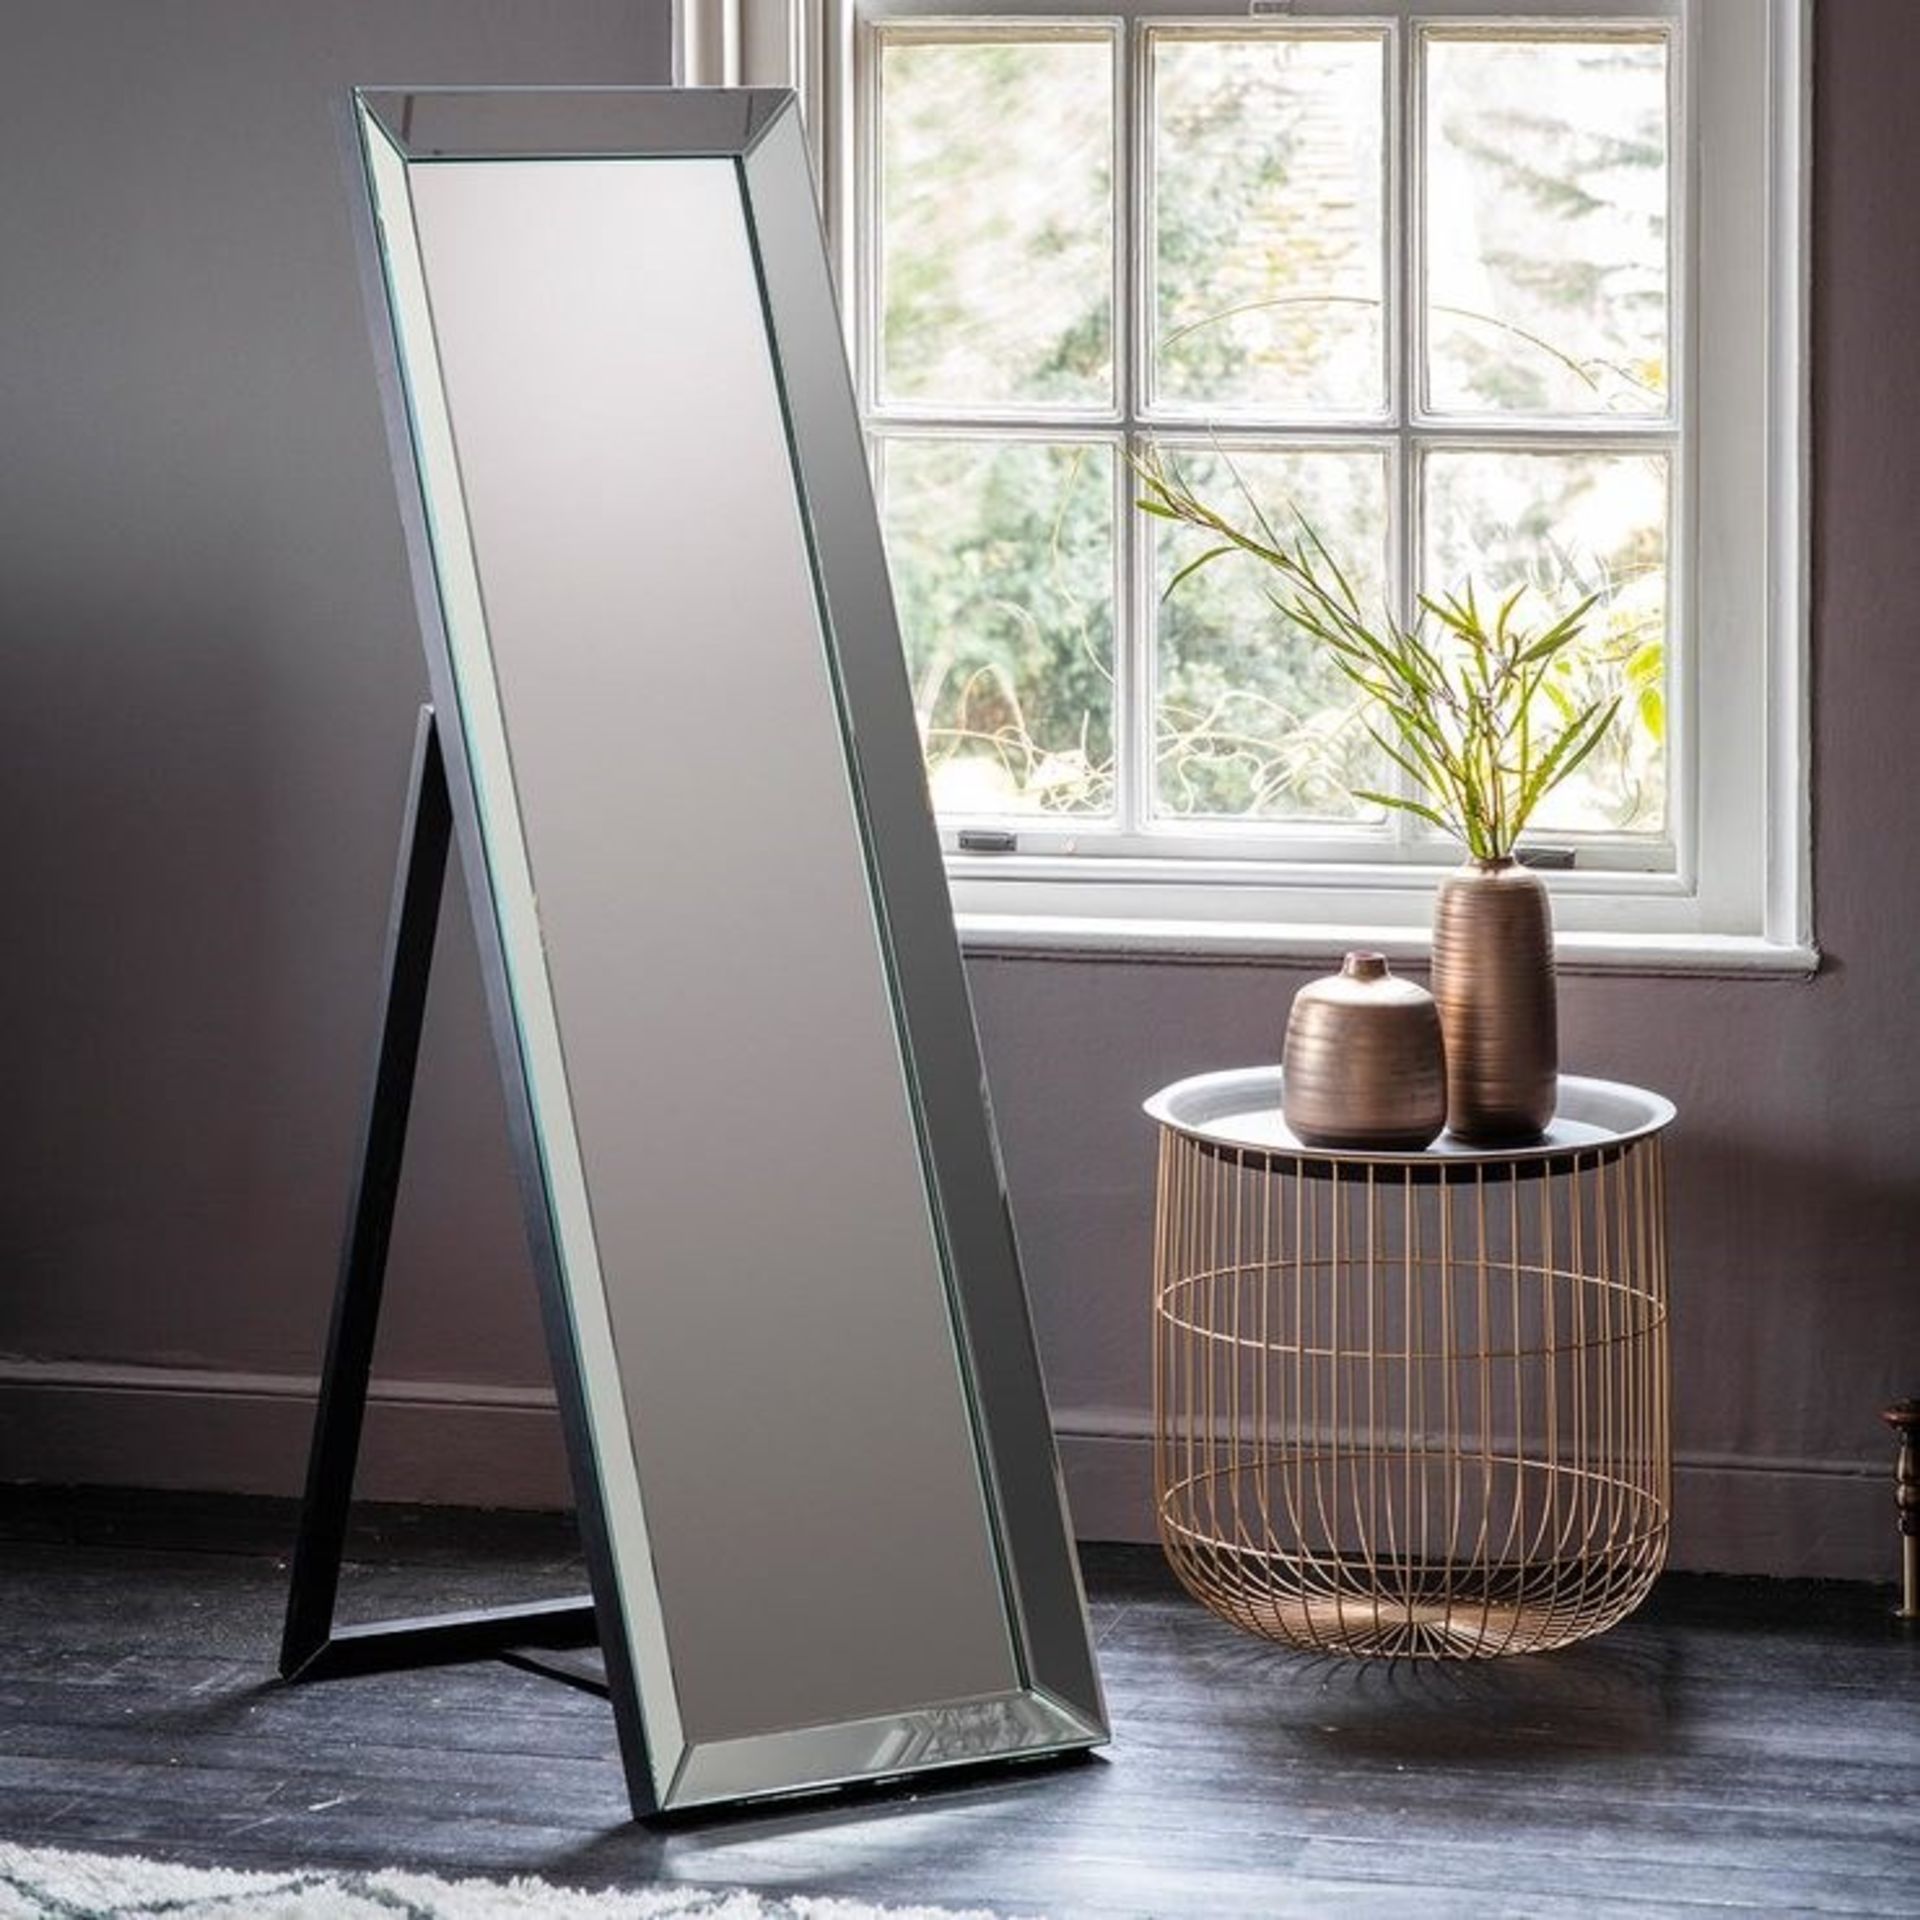 Luna Cheval Euro GreyVersatile angled all bevelled mirror framed cheval at a scale to suit any